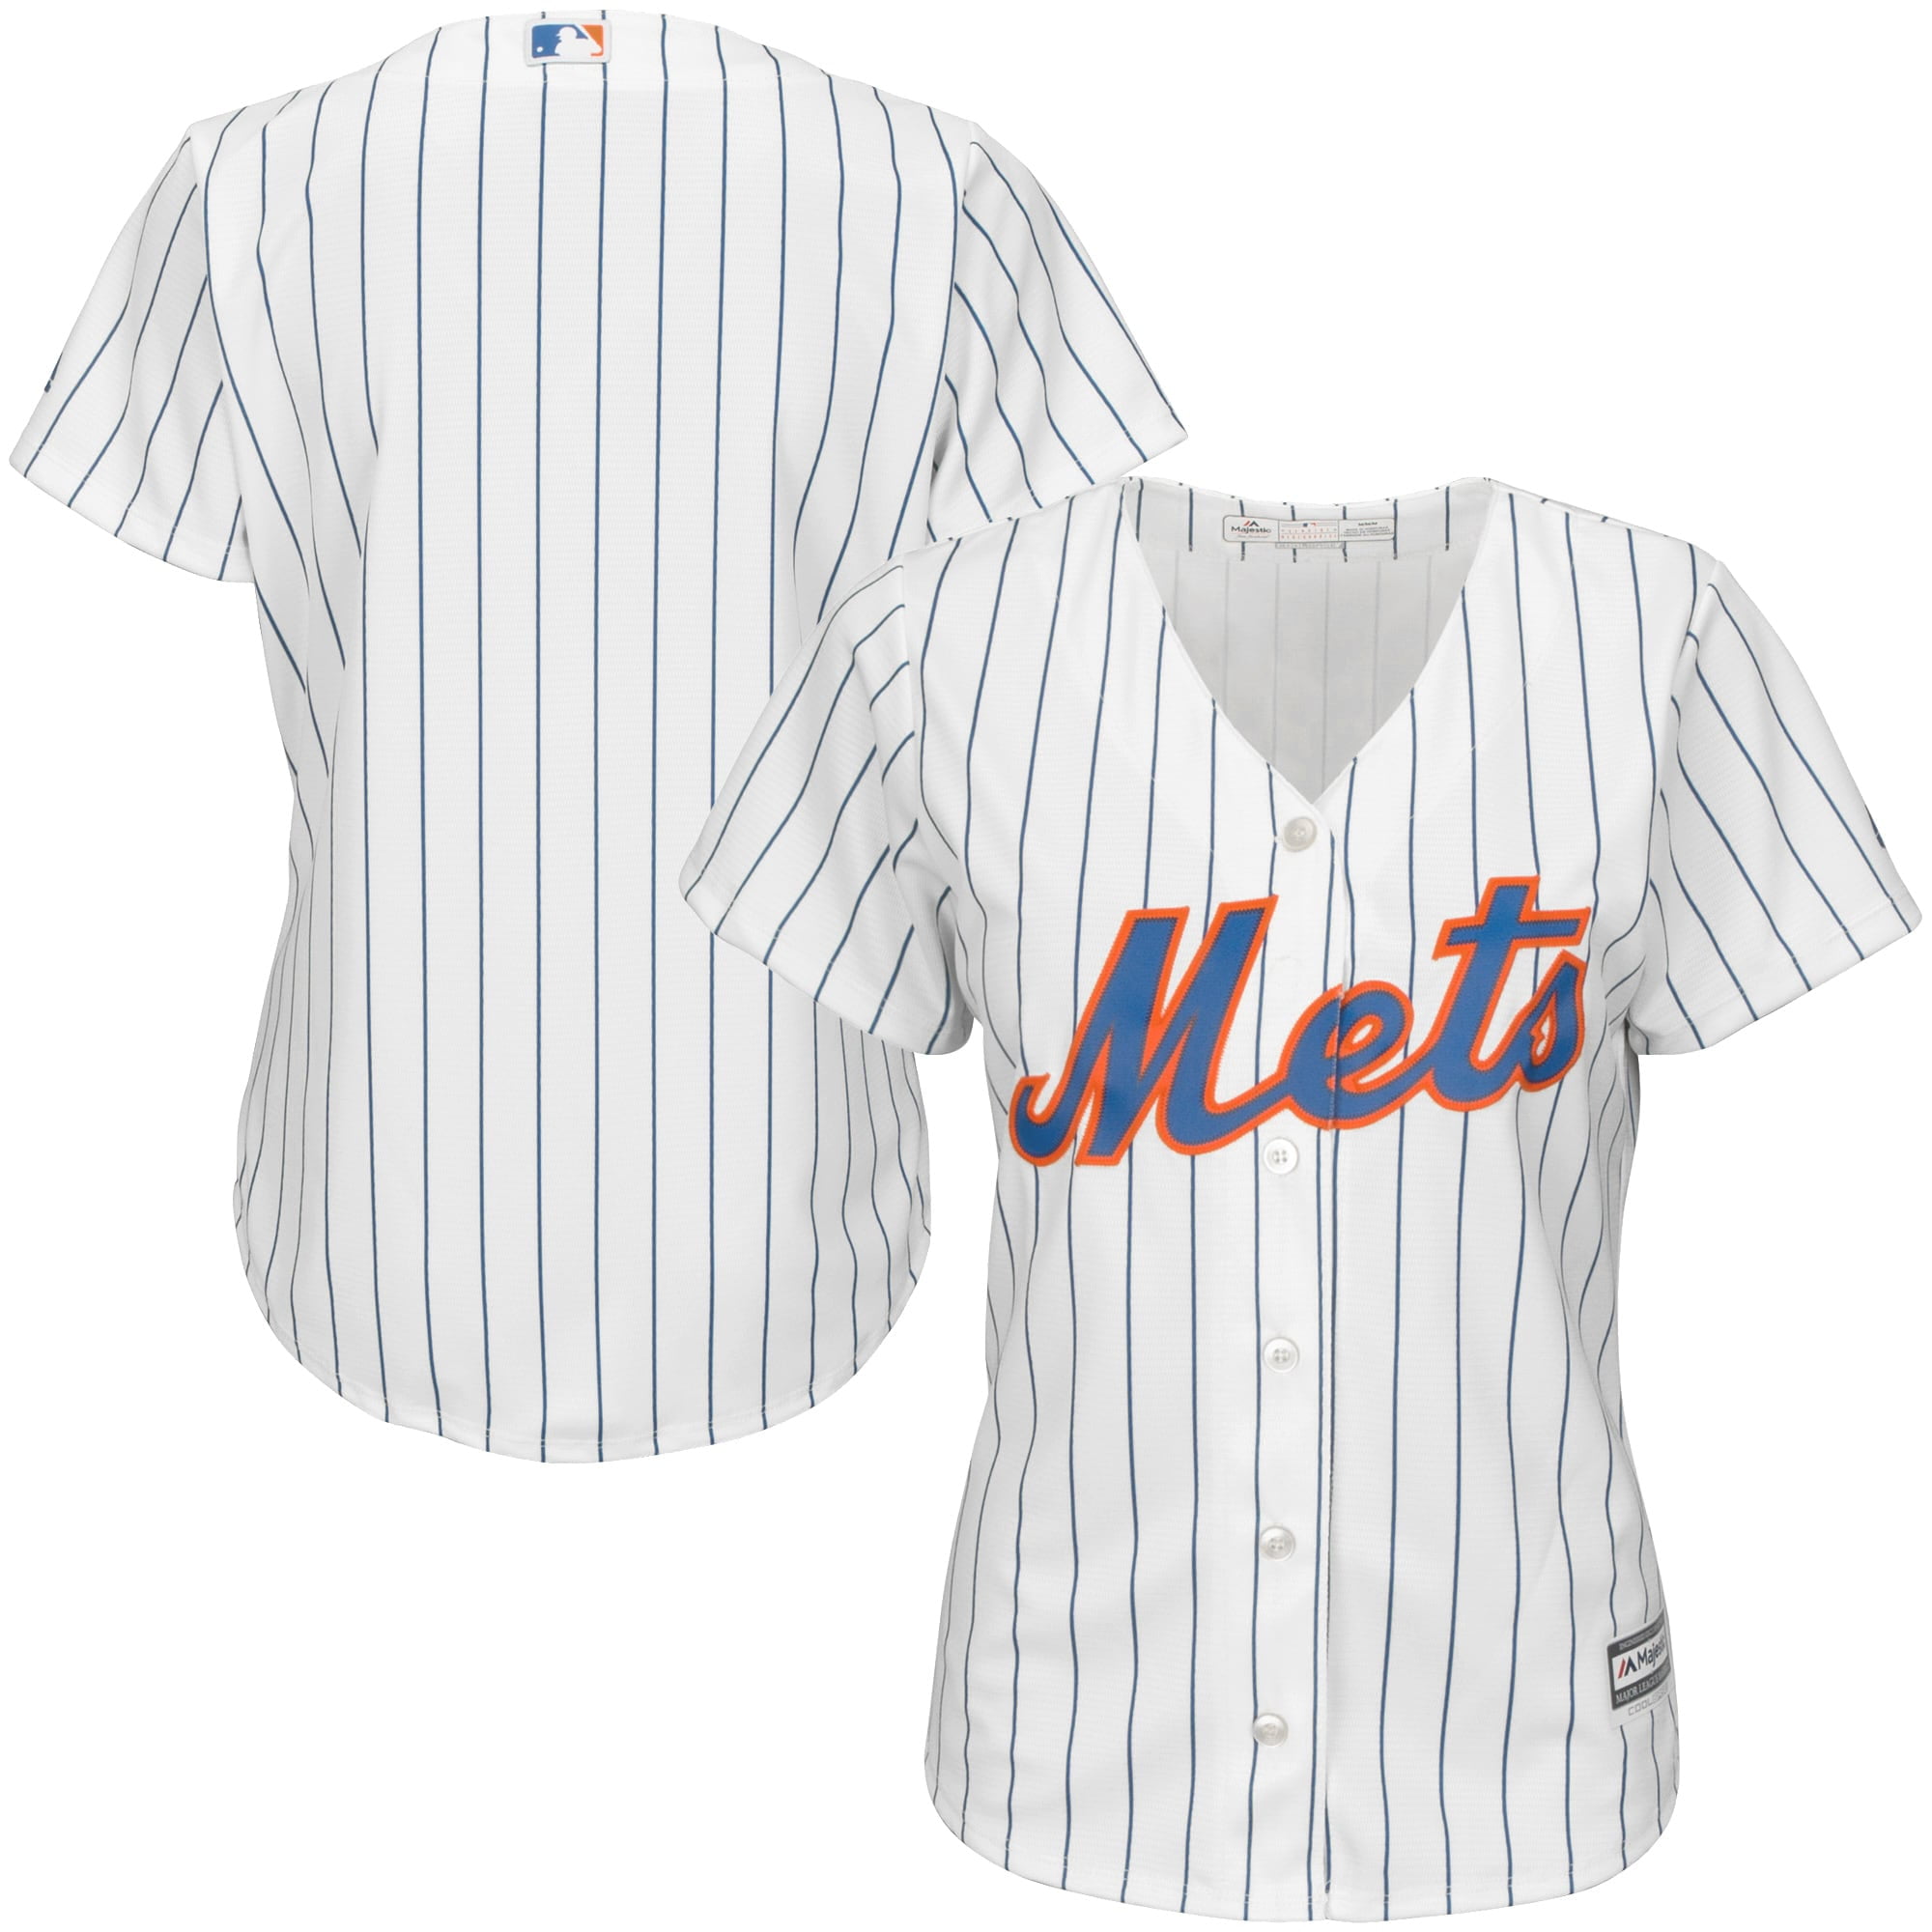 mets cool base jersey